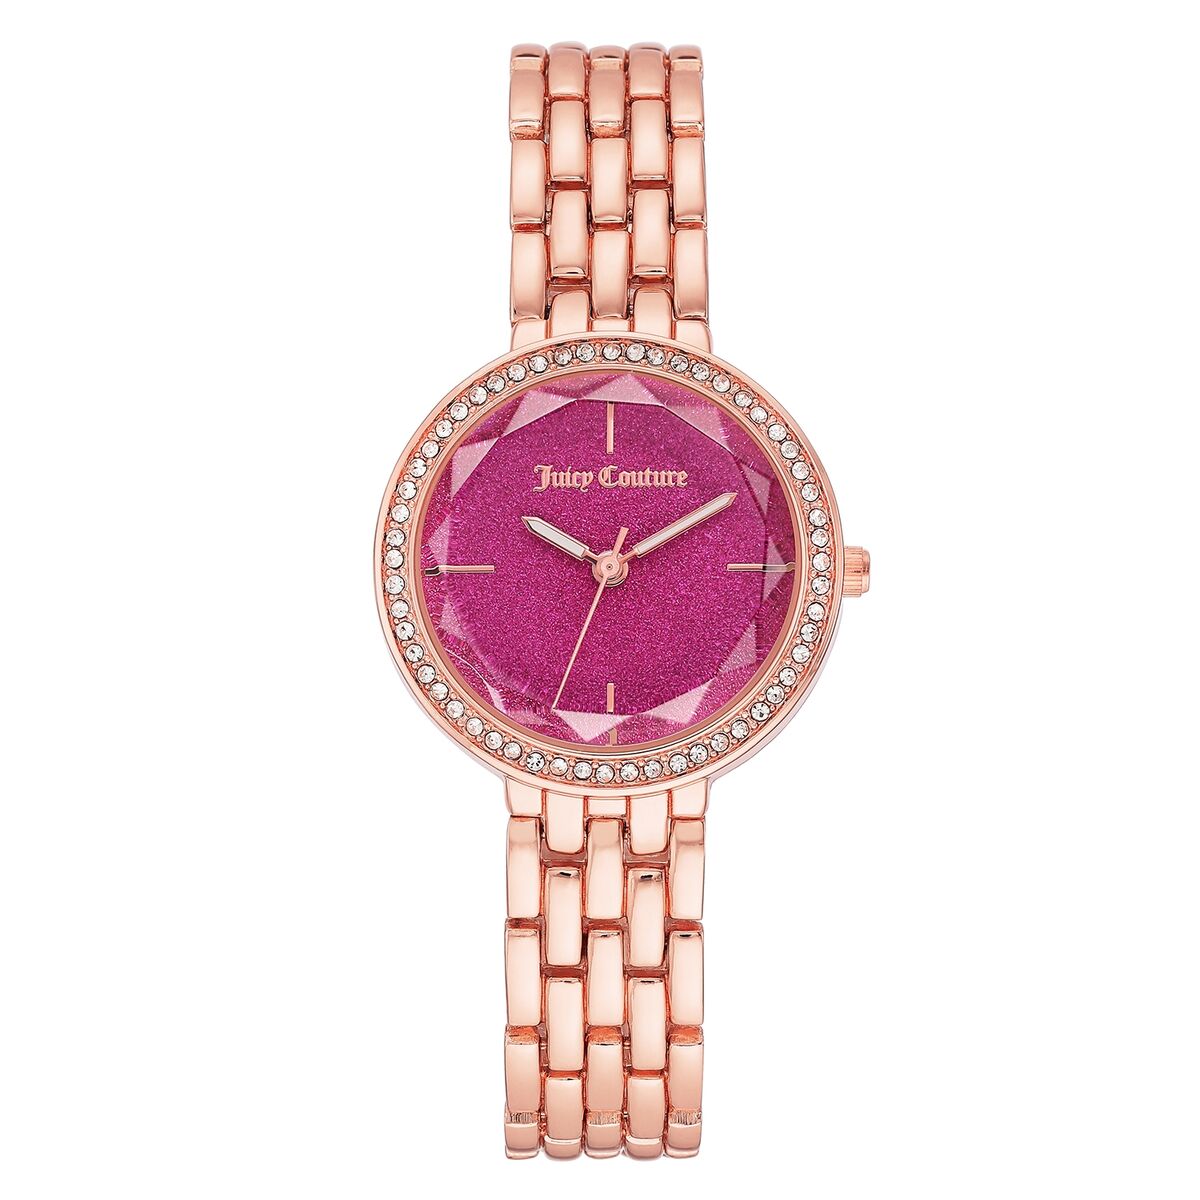 Montre Femme Juicy Couture JC_1208HPRG